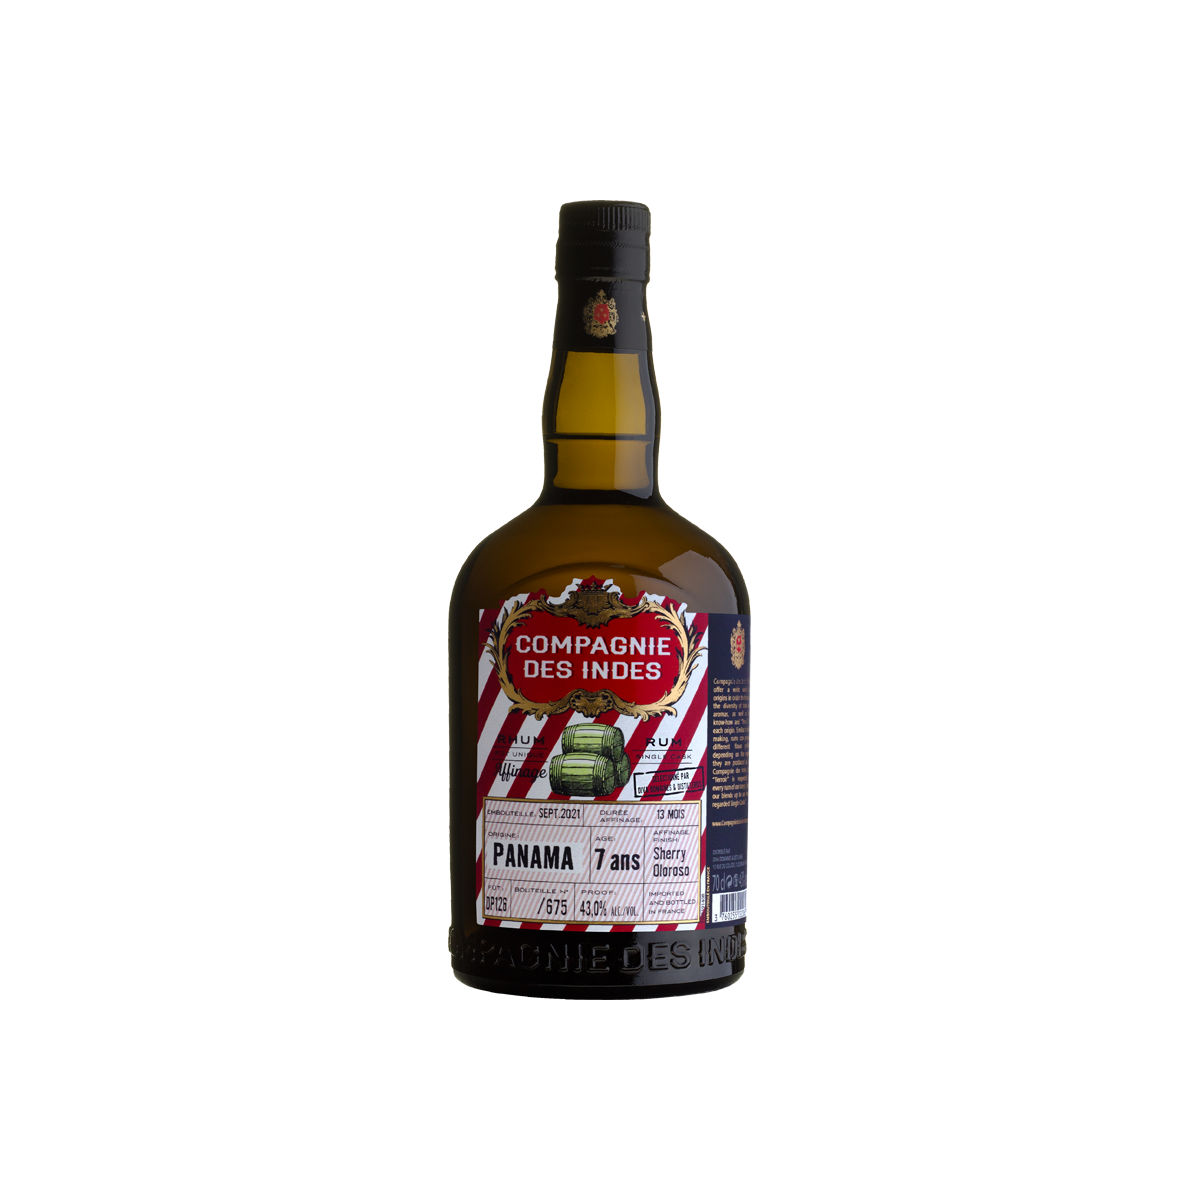 Compagnie des Indes Panama 7 ans Sherry Finish Rhum 43 %